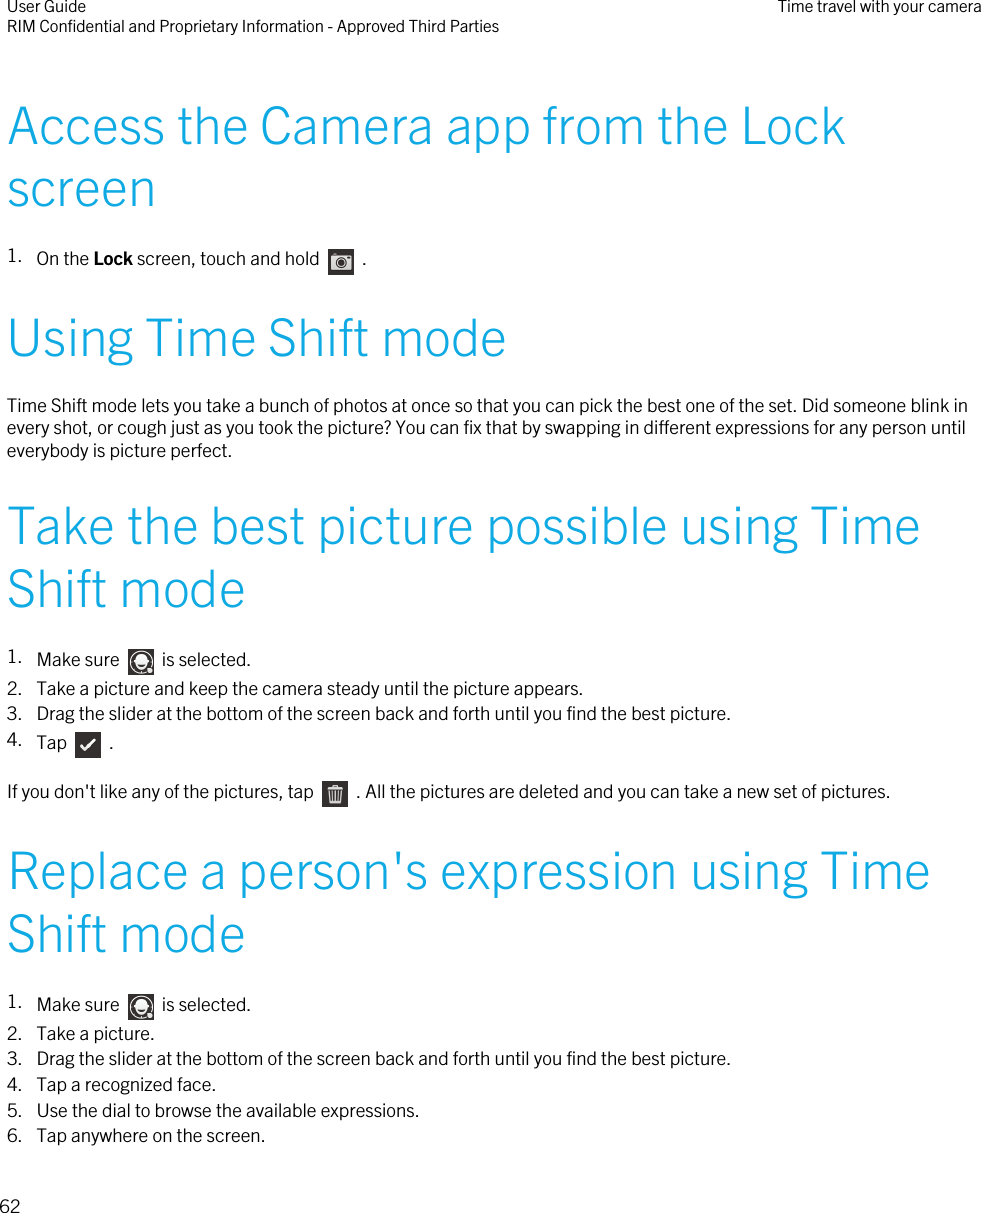 Access the Camera app from the Lockscreen1. On the Lock screen, touch and hold    .Using Time Shift modeTime Shift mode lets you take a bunch of photos at once so that you can pick the best one of the set. Did someone blink inevery shot, or cough just as you took the picture? You can fix that by swapping in different expressions for any person untileverybody is picture perfect.Take the best picture possible using TimeShift mode1. Make sure    is selected.2. Take a picture and keep the camera steady until the picture appears.3. Drag the slider at the bottom of the screen back and forth until you find the best picture.4. Tap    .If you don&apos;t like any of the pictures, tap    . All the pictures are deleted and you can take a new set of pictures.Replace a person&apos;s expression using TimeShift mode1. Make sure    is selected.2. Take a picture.3. Drag the slider at the bottom of the screen back and forth until you find the best picture.4. Tap a recognized face.5. Use the dial to browse the available expressions.6. Tap anywhere on the screen.User GuideRIM Confidential and Proprietary Information - Approved Third Parties Time travel with your camera62